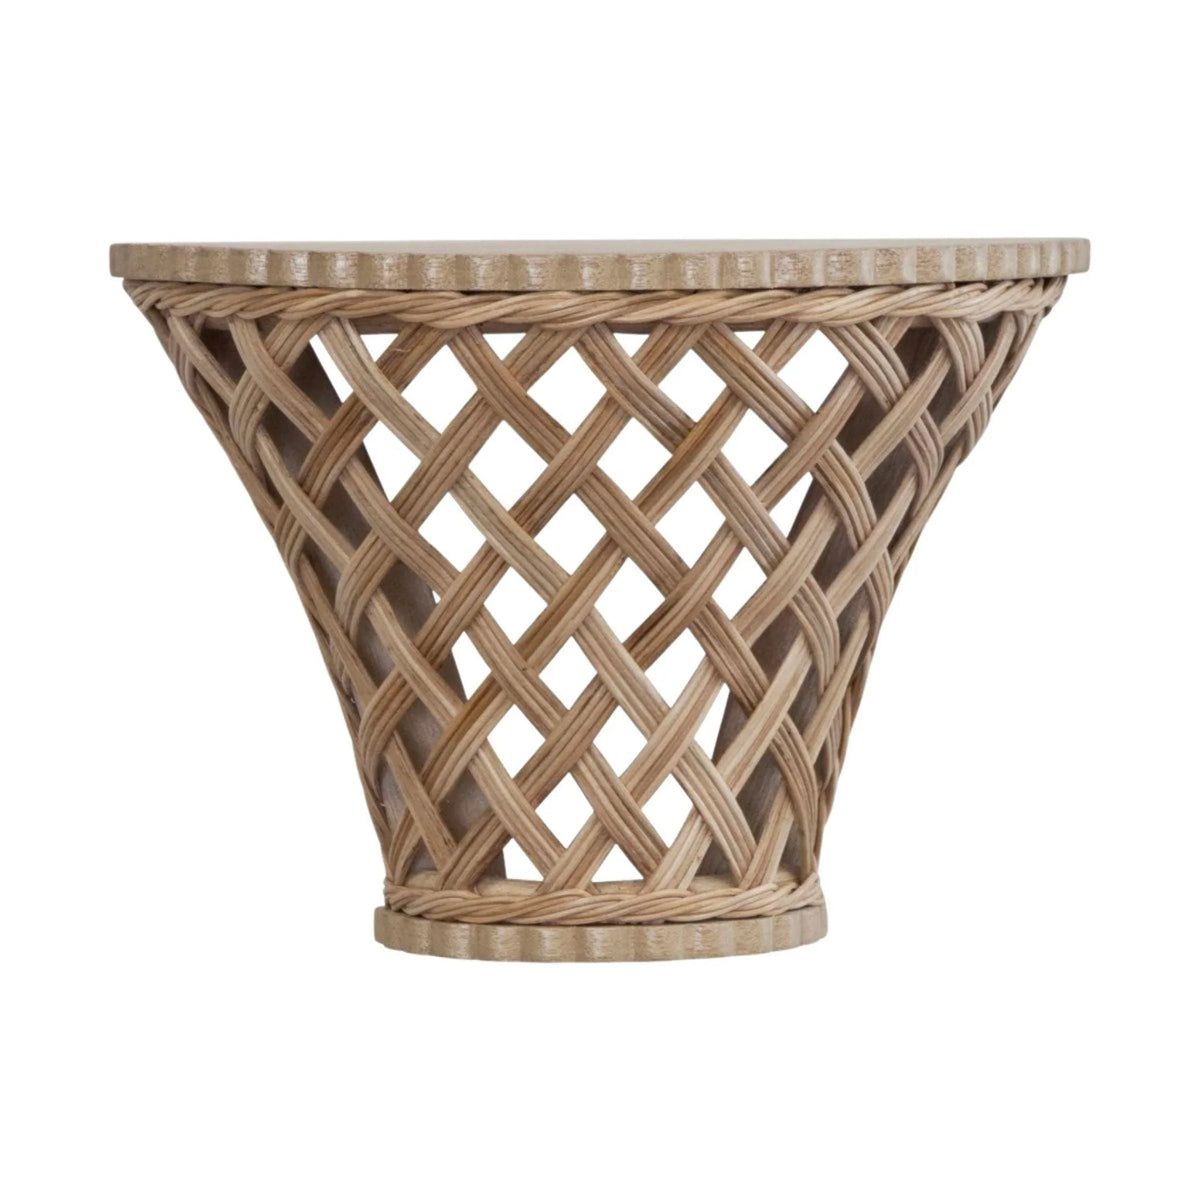 Rattan Wall Bracket Shelf with Trellis Lattice Front | The Well Appointed House, LLC